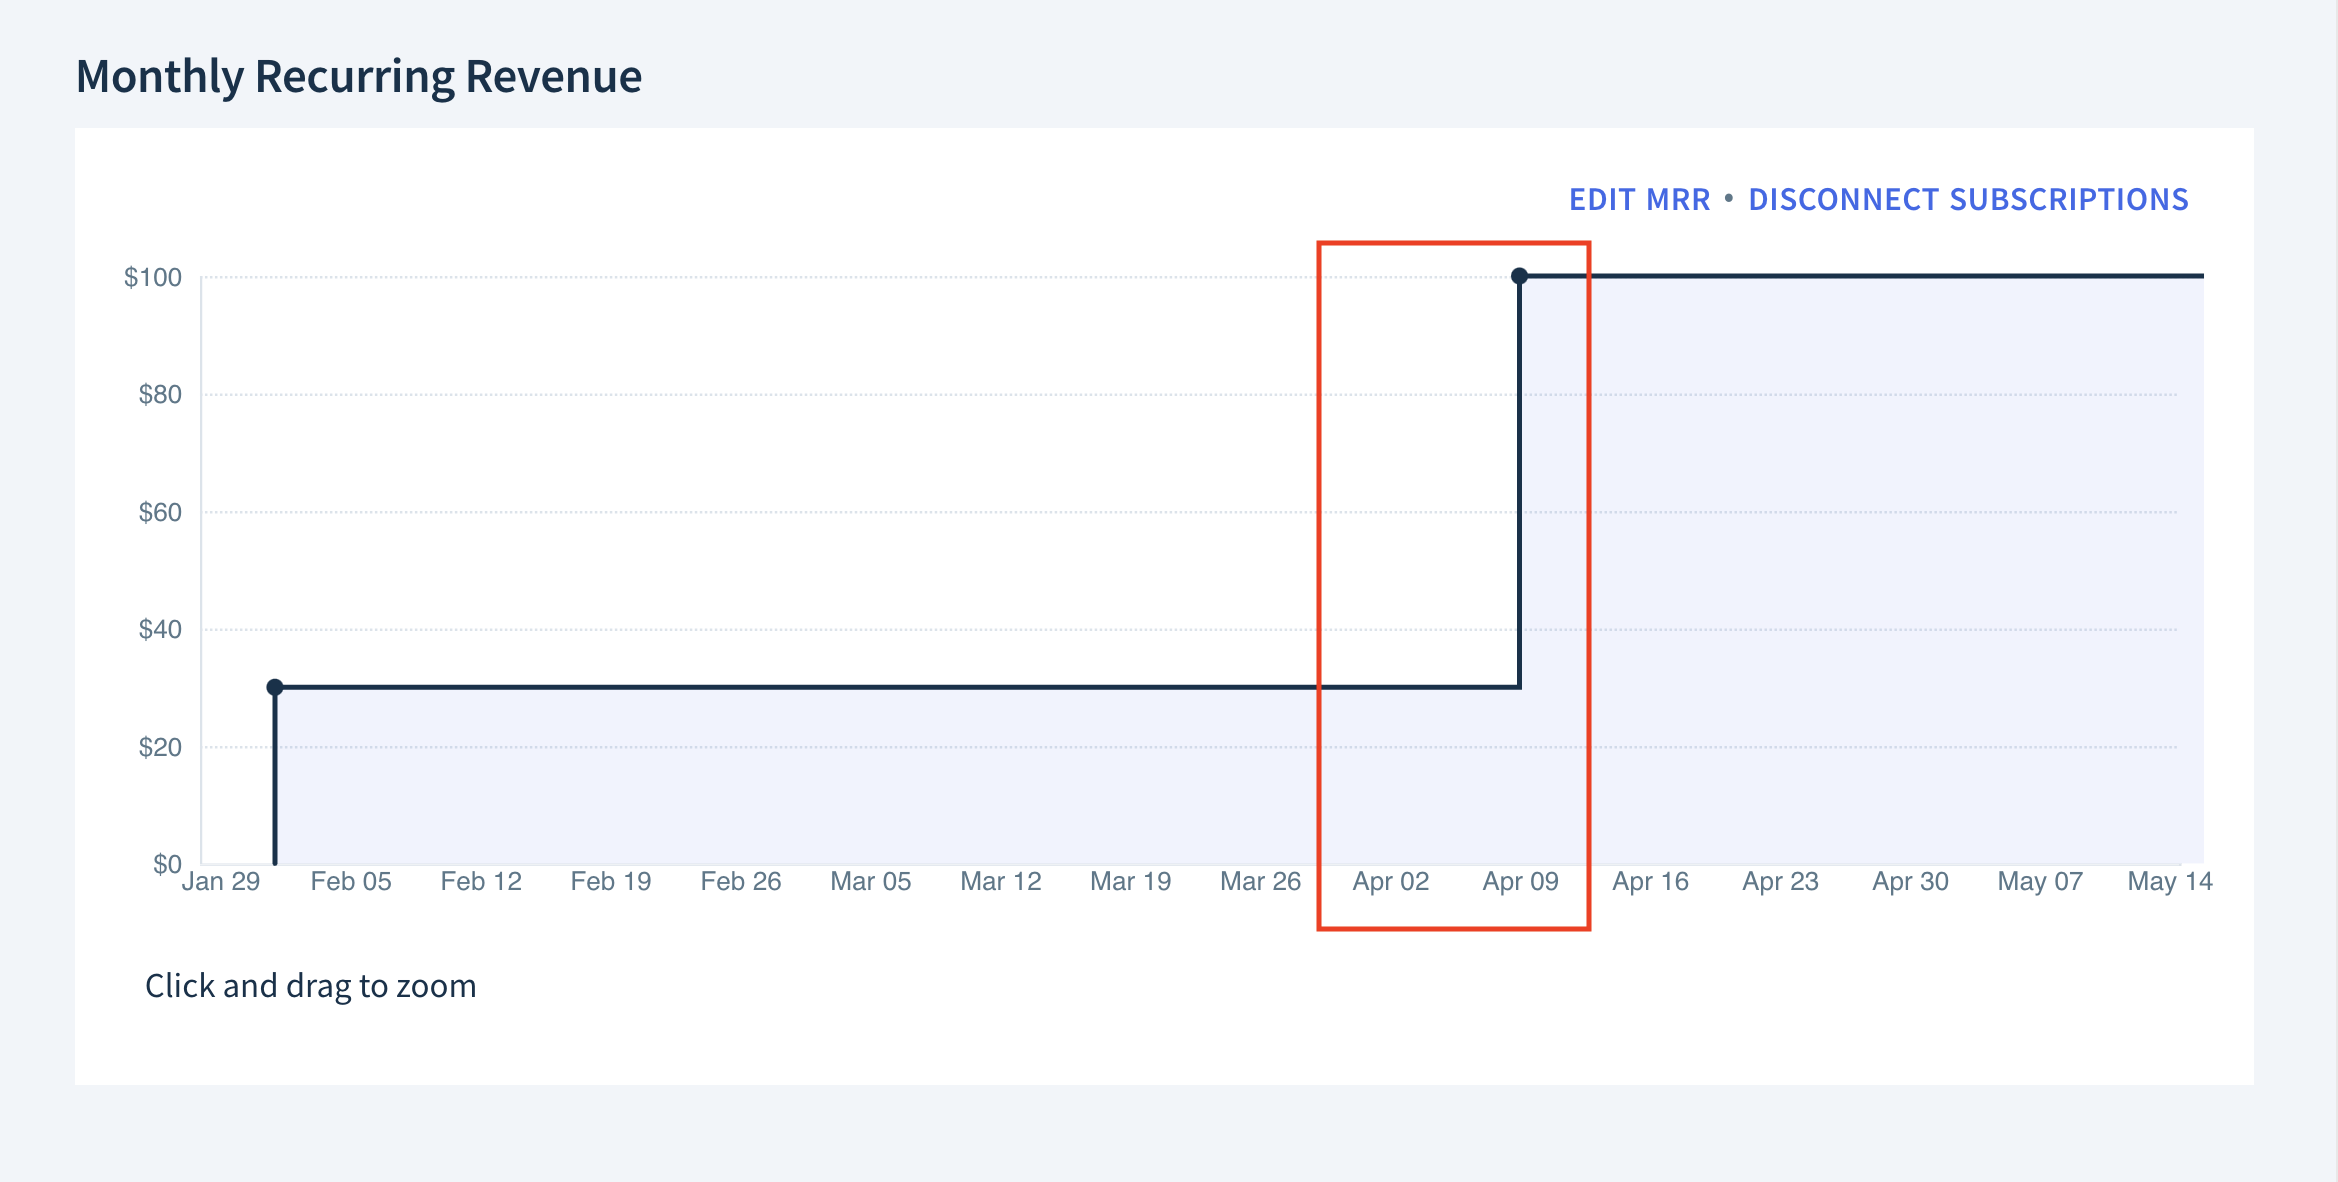 Screenshot of the Monthly Recurring Revenue graph from the previous figure after connecting the two subscriptions. Now there is one subscription that starts at the beginning of February and is still active. The subscription starts with an MRR of 30 dollars. On April 9th, which is the beginning of the most recent subscription, the MRR changes to 100 dollars. The gap between the subscriptions has been filled with the MRR of the older subscription.